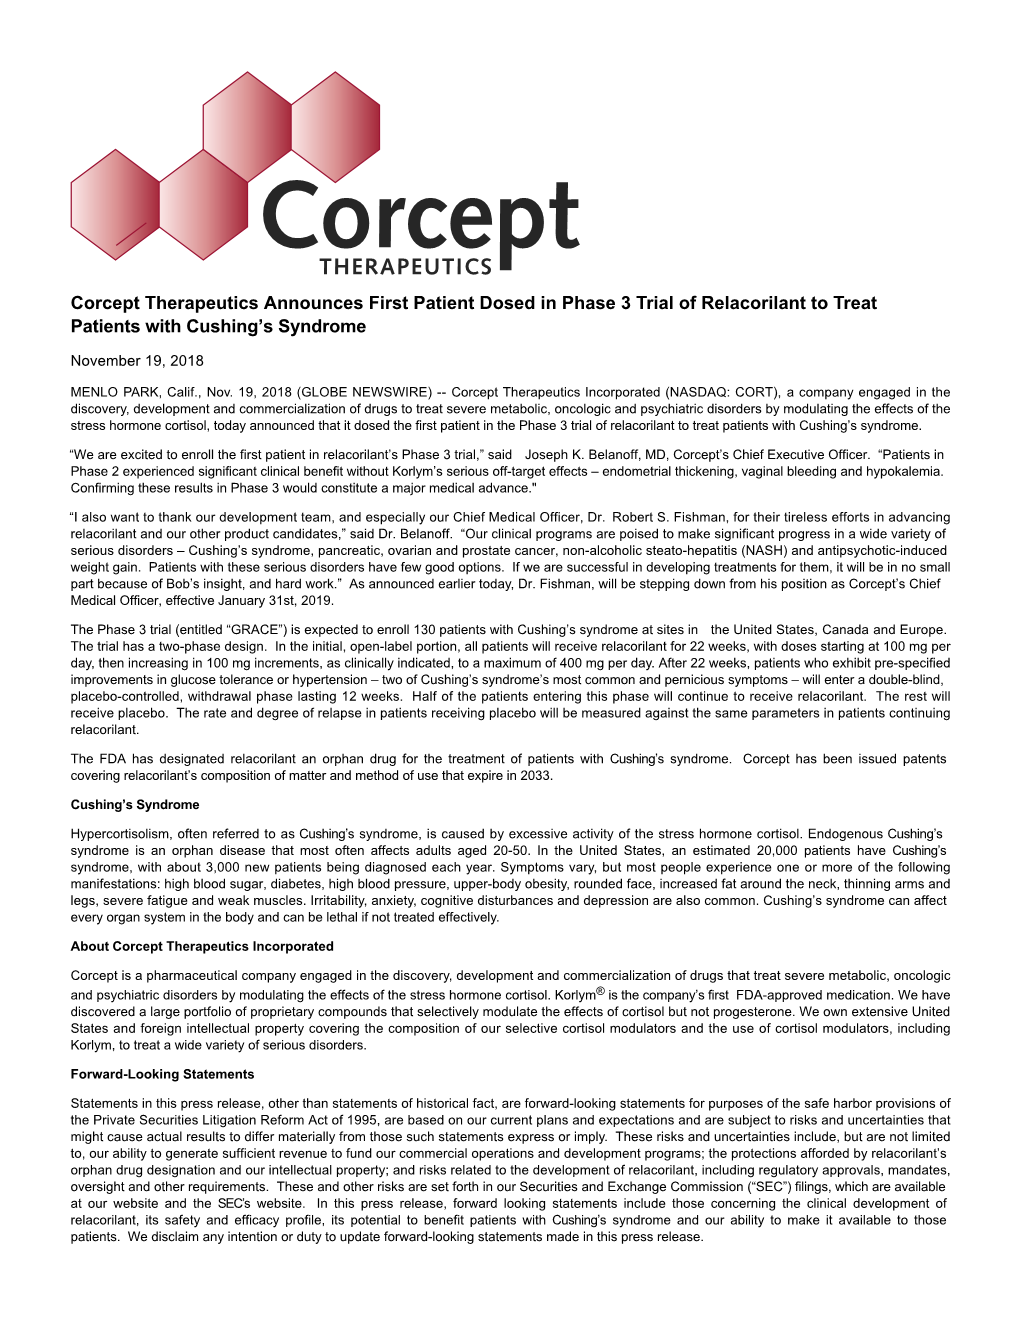 Corcept Therapeutics Announces First Patient Dosed in Phase 3 Trial of Relacorilant to Treat Patients with Cushing’S Syndrome